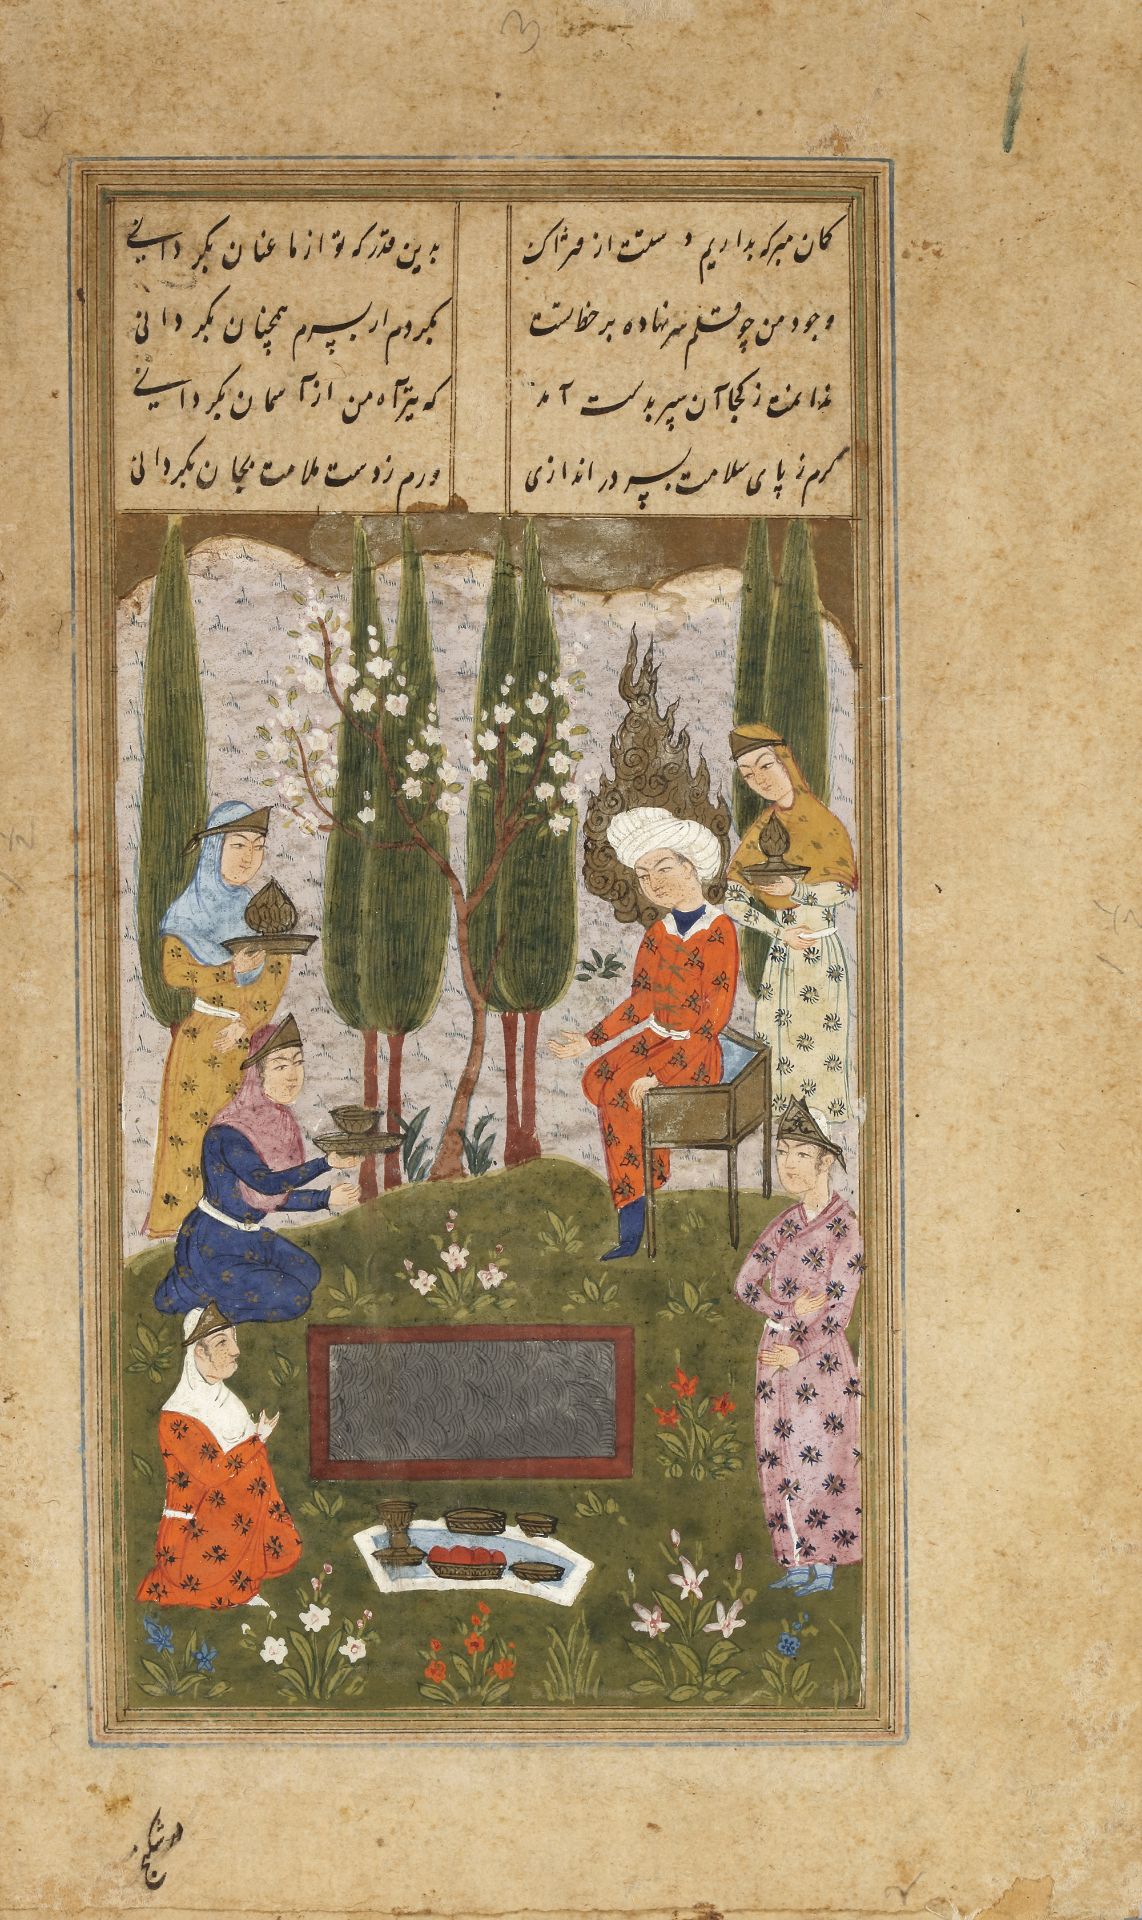 A FOLIO FROM A DISPERSED MANUSCRIPT OF PERSIAN POETRY, PERSIA SAFAVID, 16TH-17TH CENTURY - Image 2 of 2